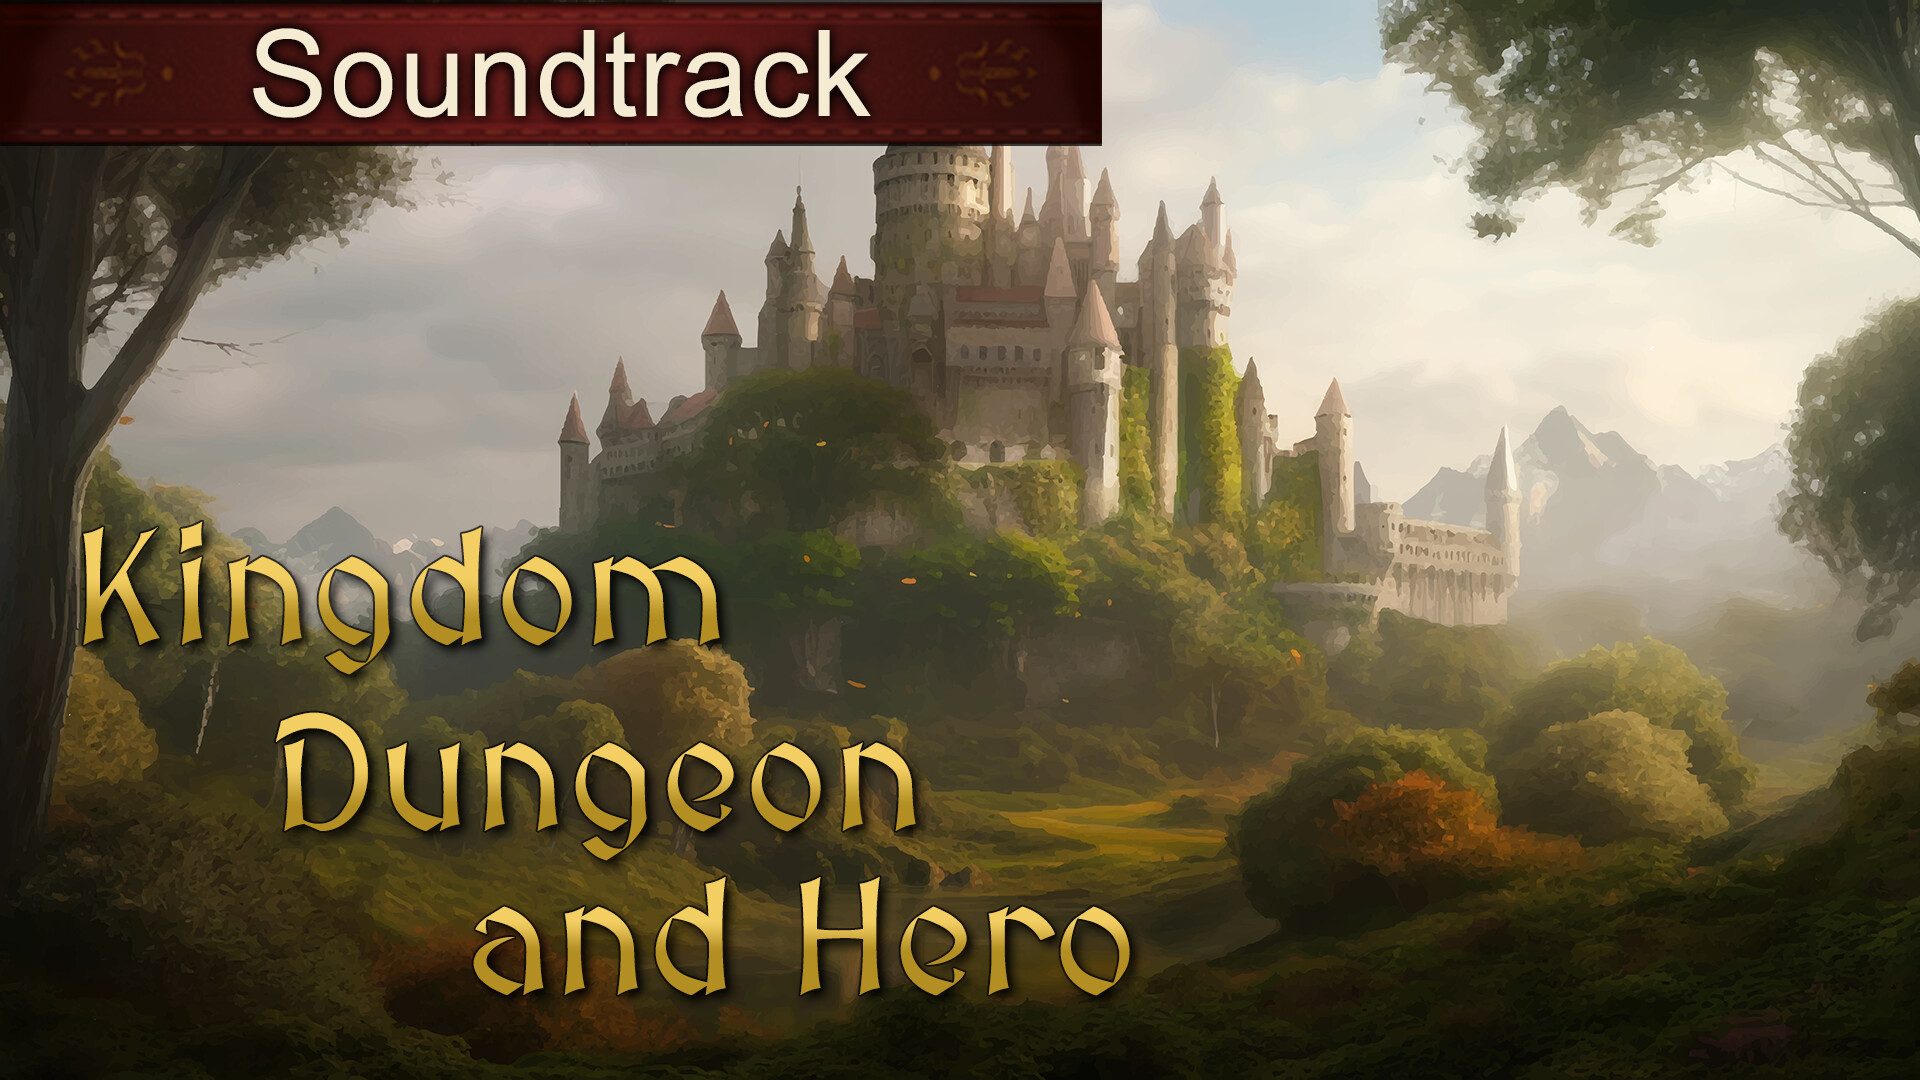 Kingdom, Dungeon, and Hero Soundtrack Featured Screenshot #1